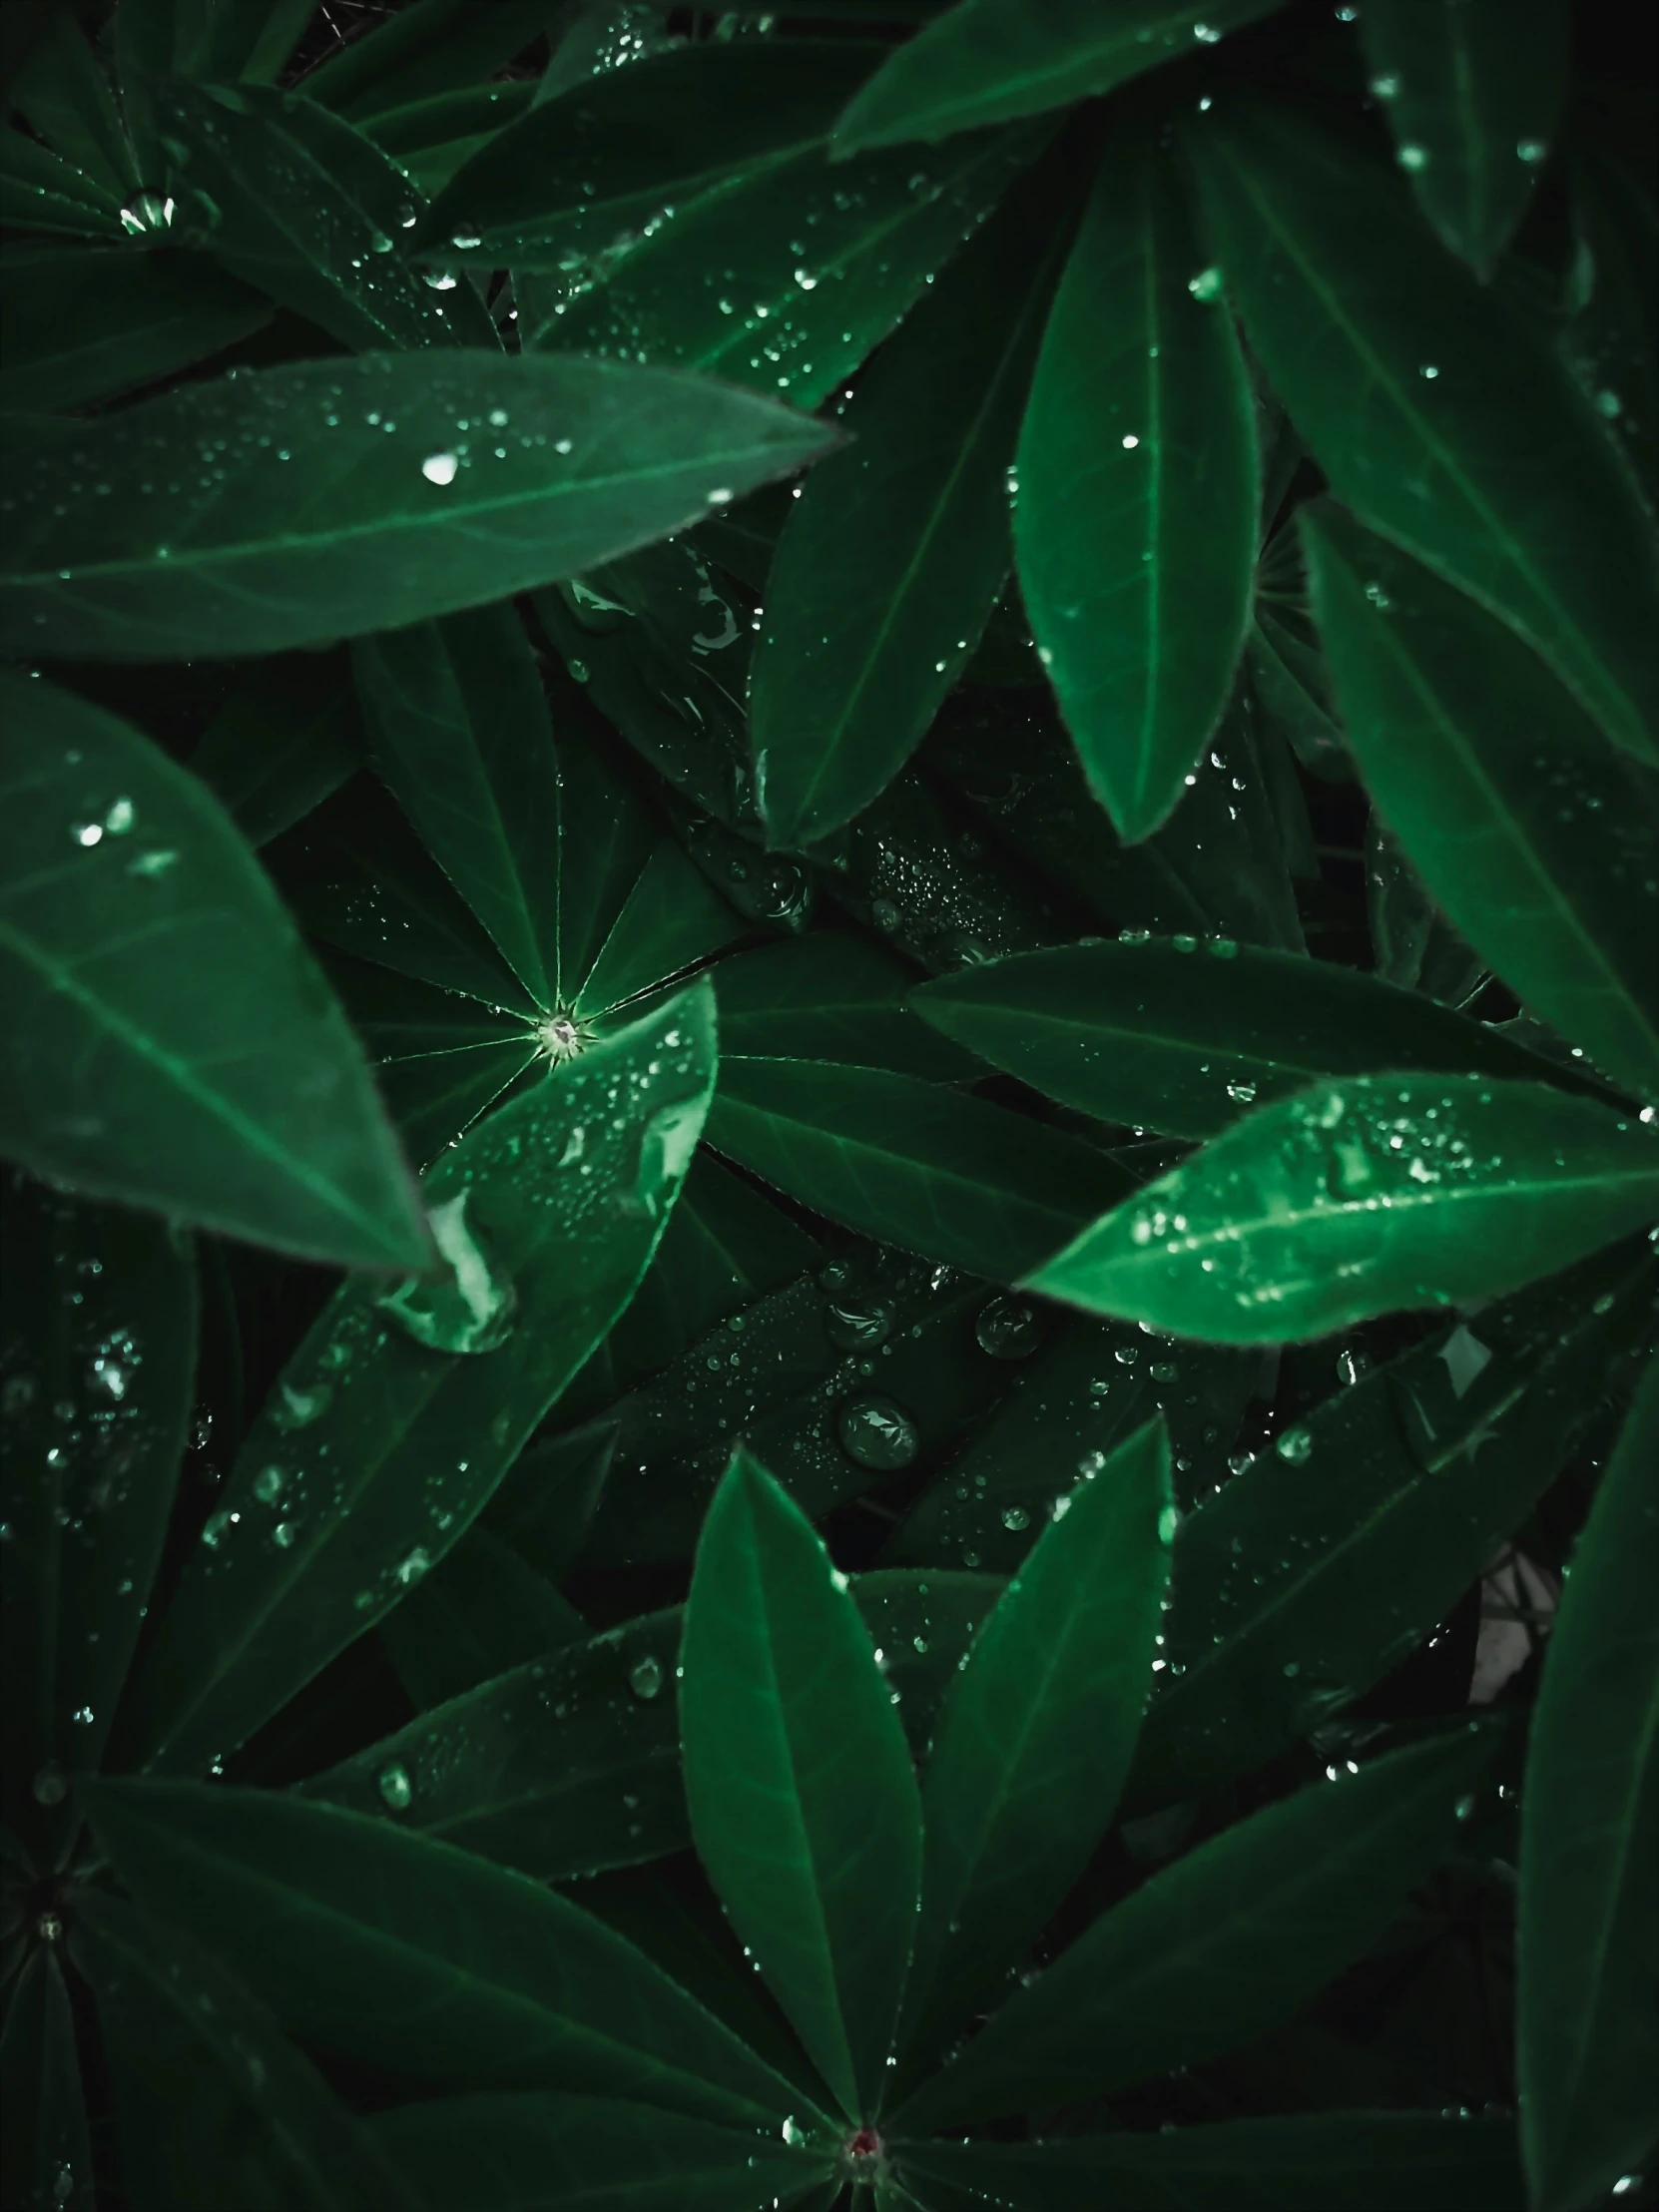 some green leaves and water drops on the leaves